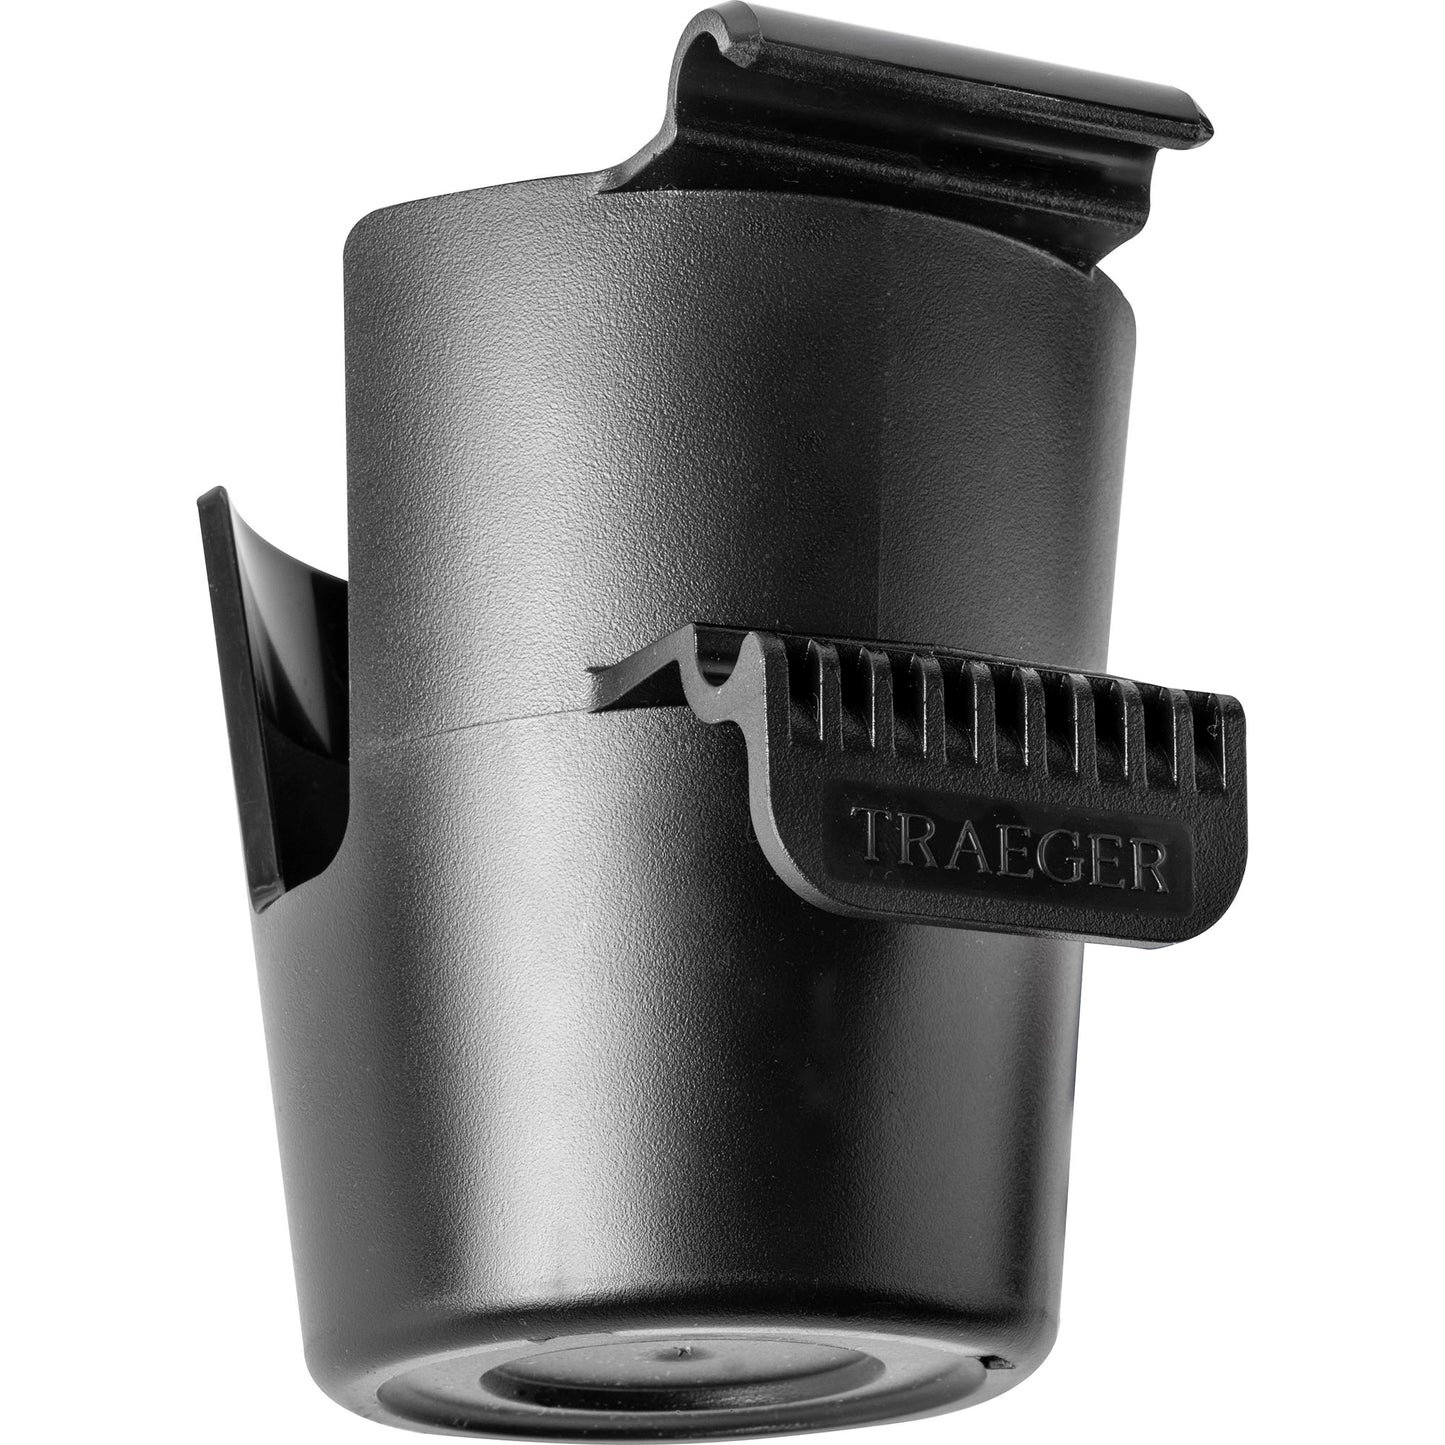 Traeger accessories - Pop-And-Lock™ - Cup Holder